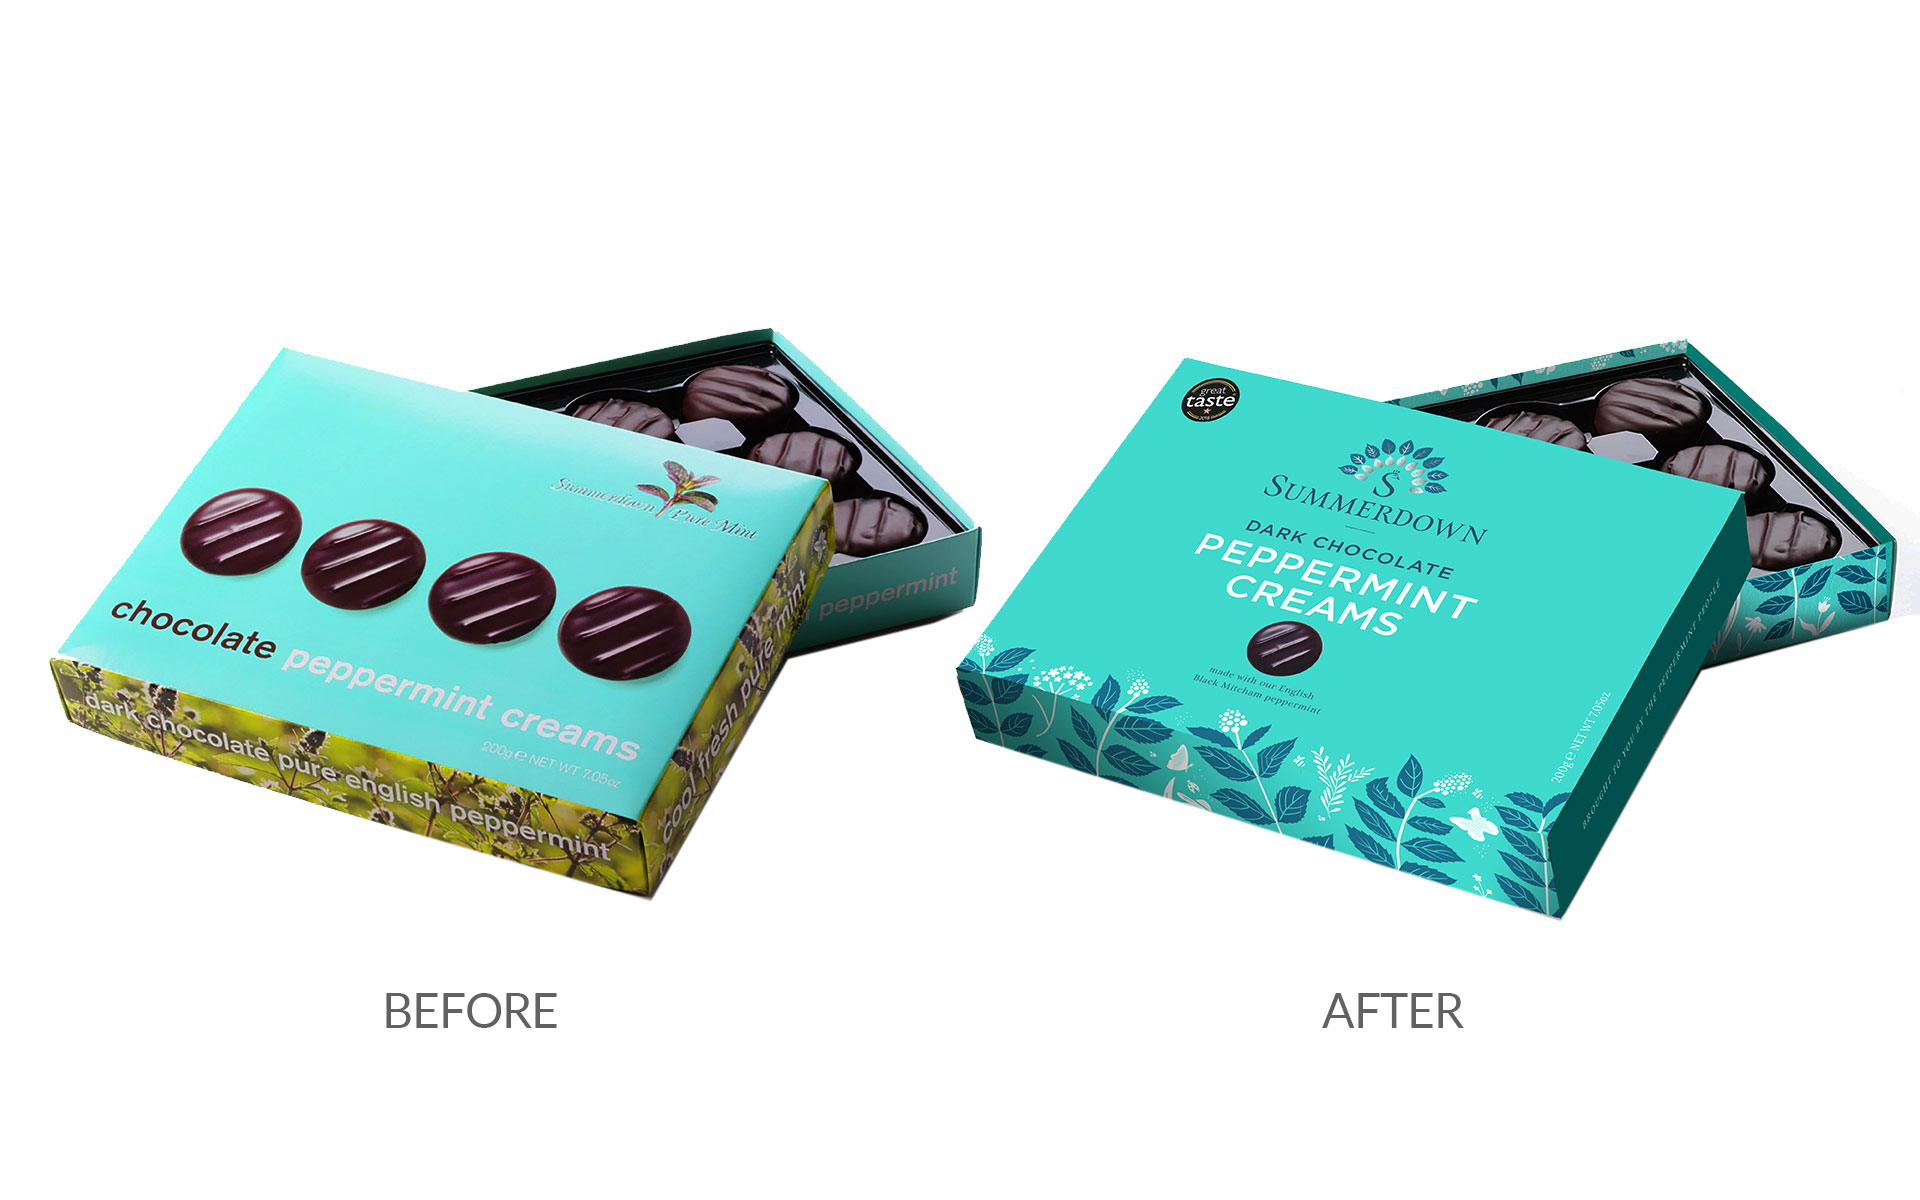 redesign of Summerdown chocolate and tea